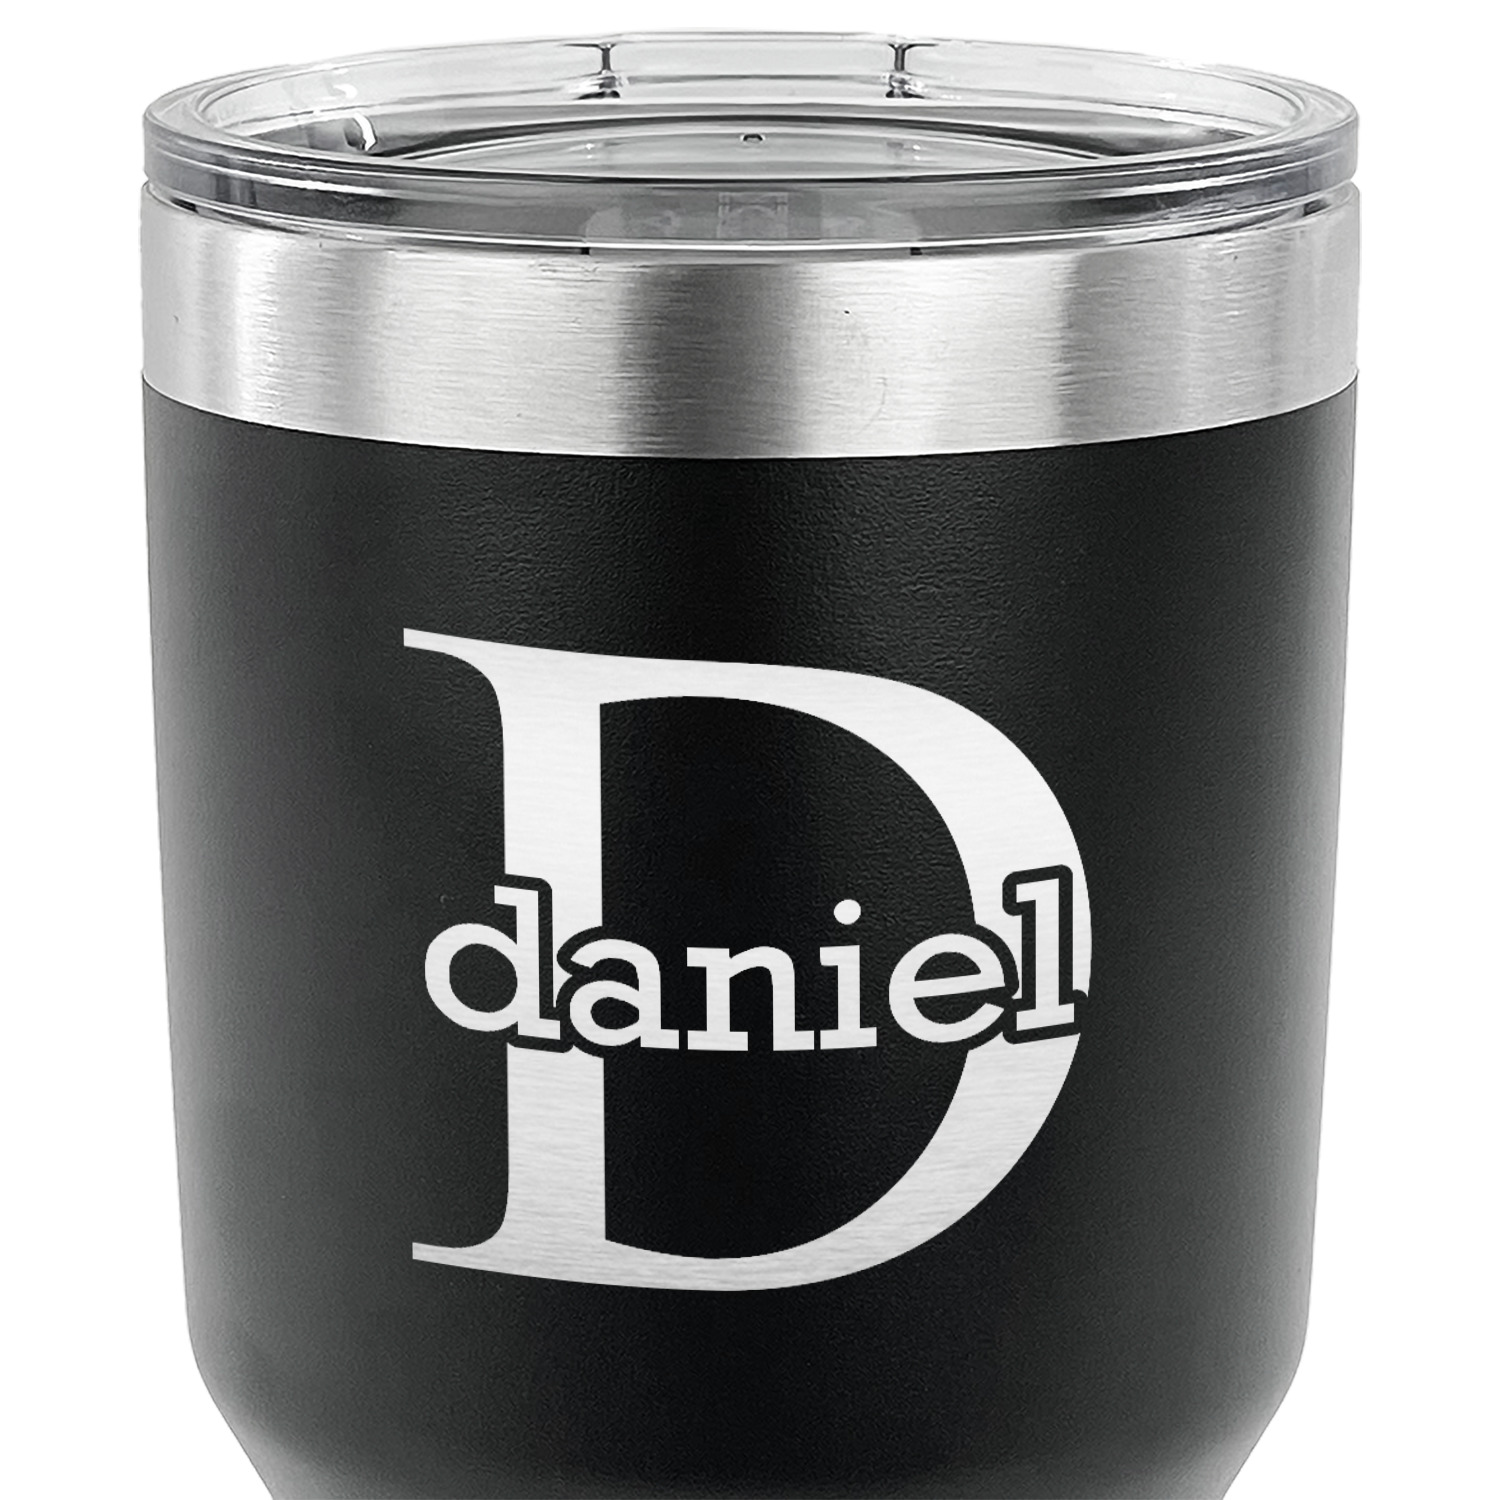 https://www.youcustomizeit.com/common/MAKE/837778/Name-Initial-for-Guys-30-oz-Stainless-Steel-Ringneck-Tumbler-Black-CLOSE-UP.jpg?lm=1687531002